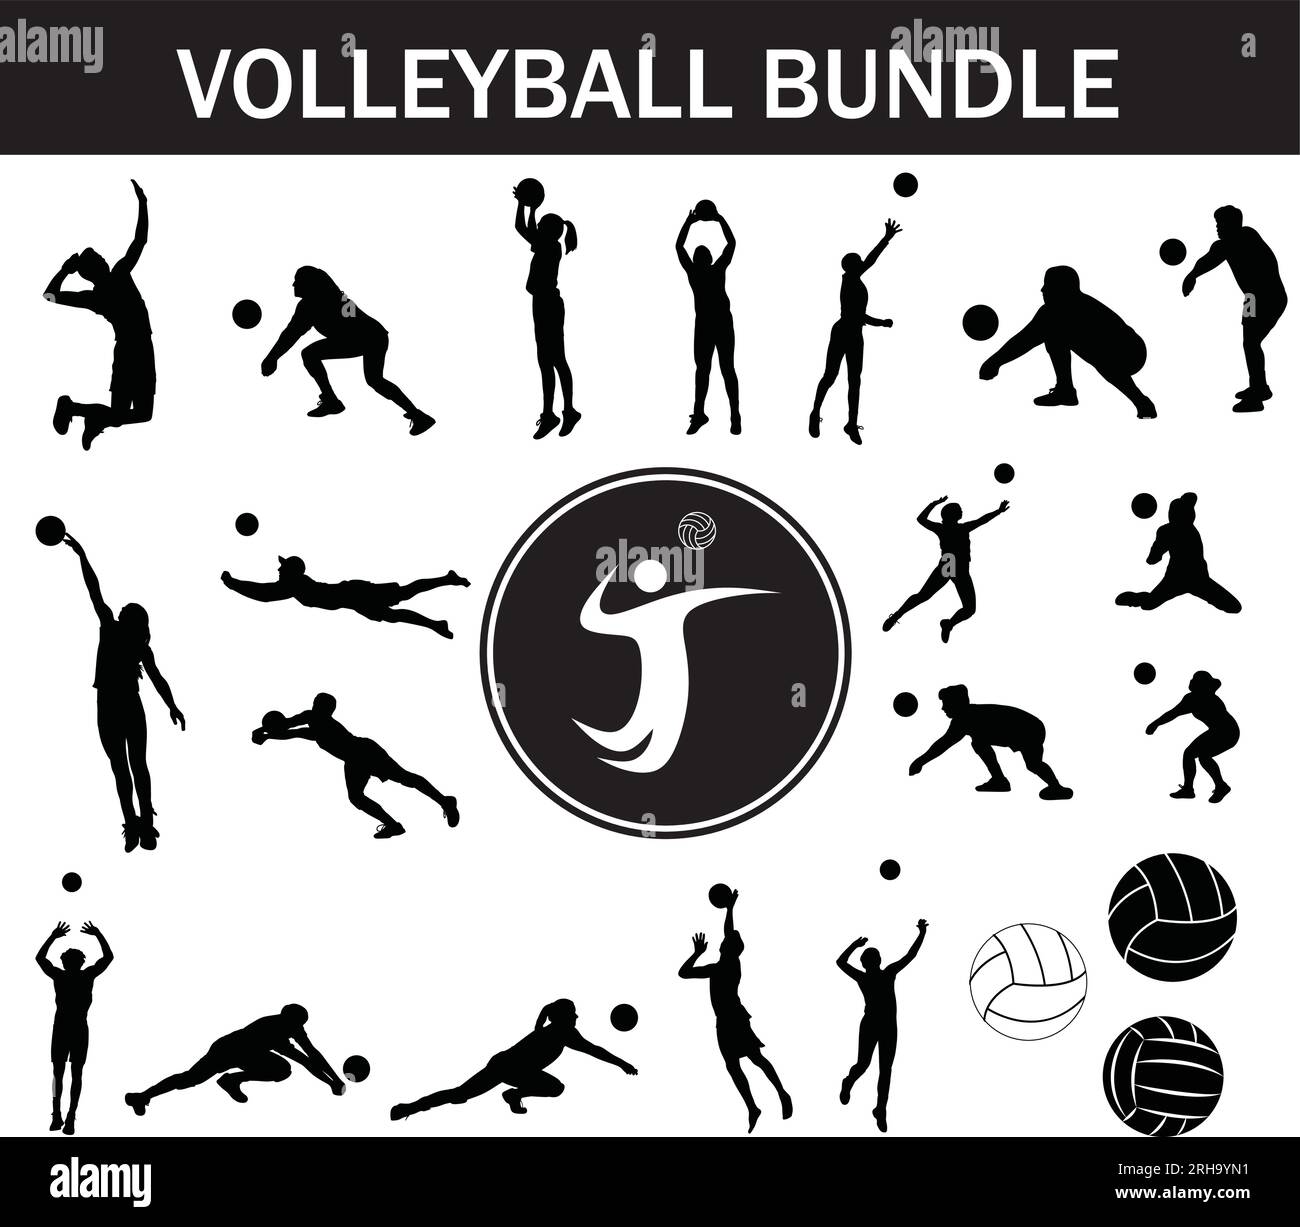 Volleyball Silhouette Bundle | Collection of Volleyball Players with ...